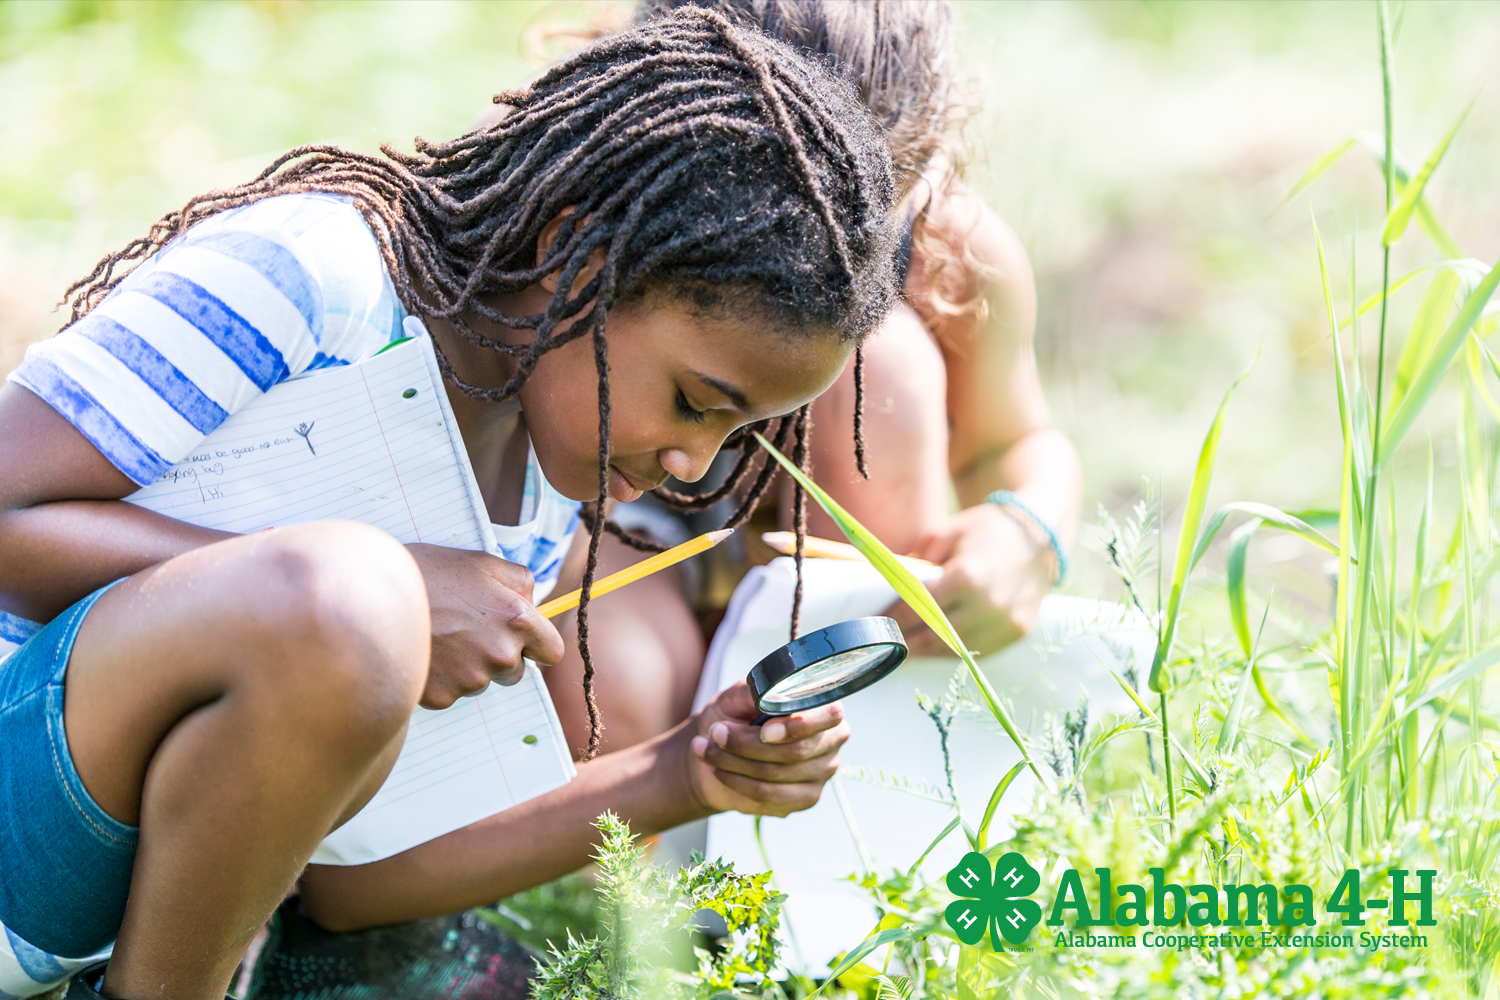 Alabama 4-H Project WILD 4-H member looking through magnifying glass